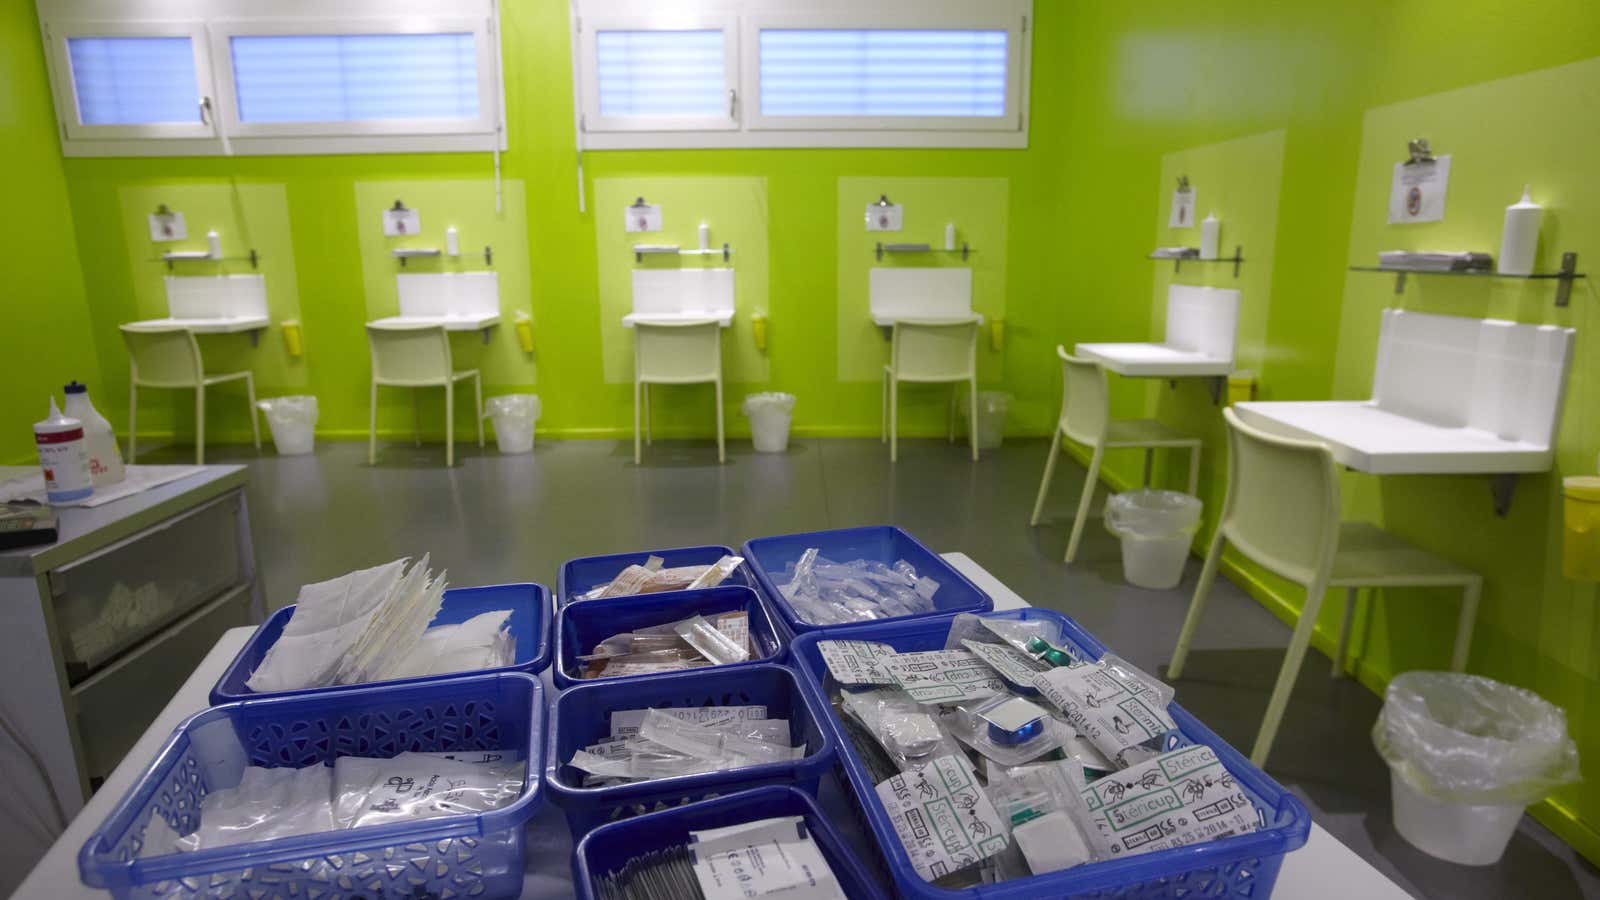 Safe injection sites like this one in Europe have been shown to save lives, reduce public injection, and function as a gateway to other vital services, including addiction treatment.